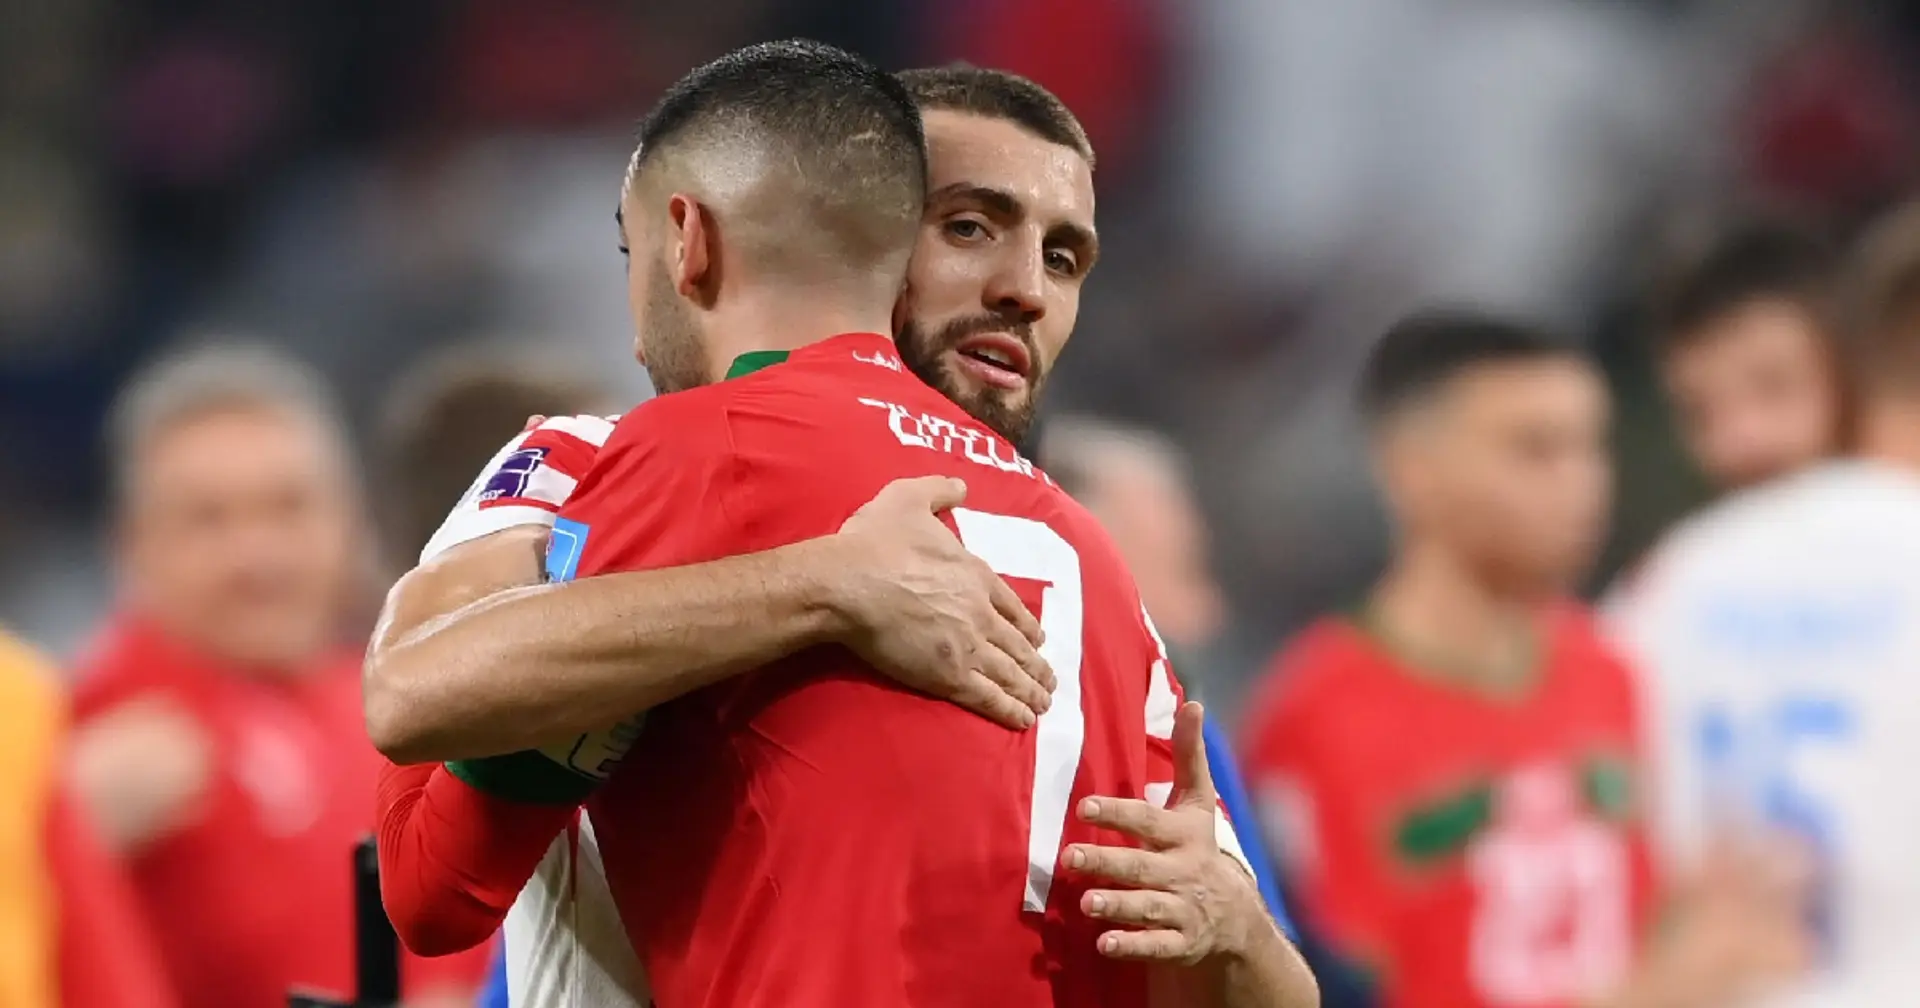 Caught on camera: Kovacic consoles Ziyech after World Cup face-off